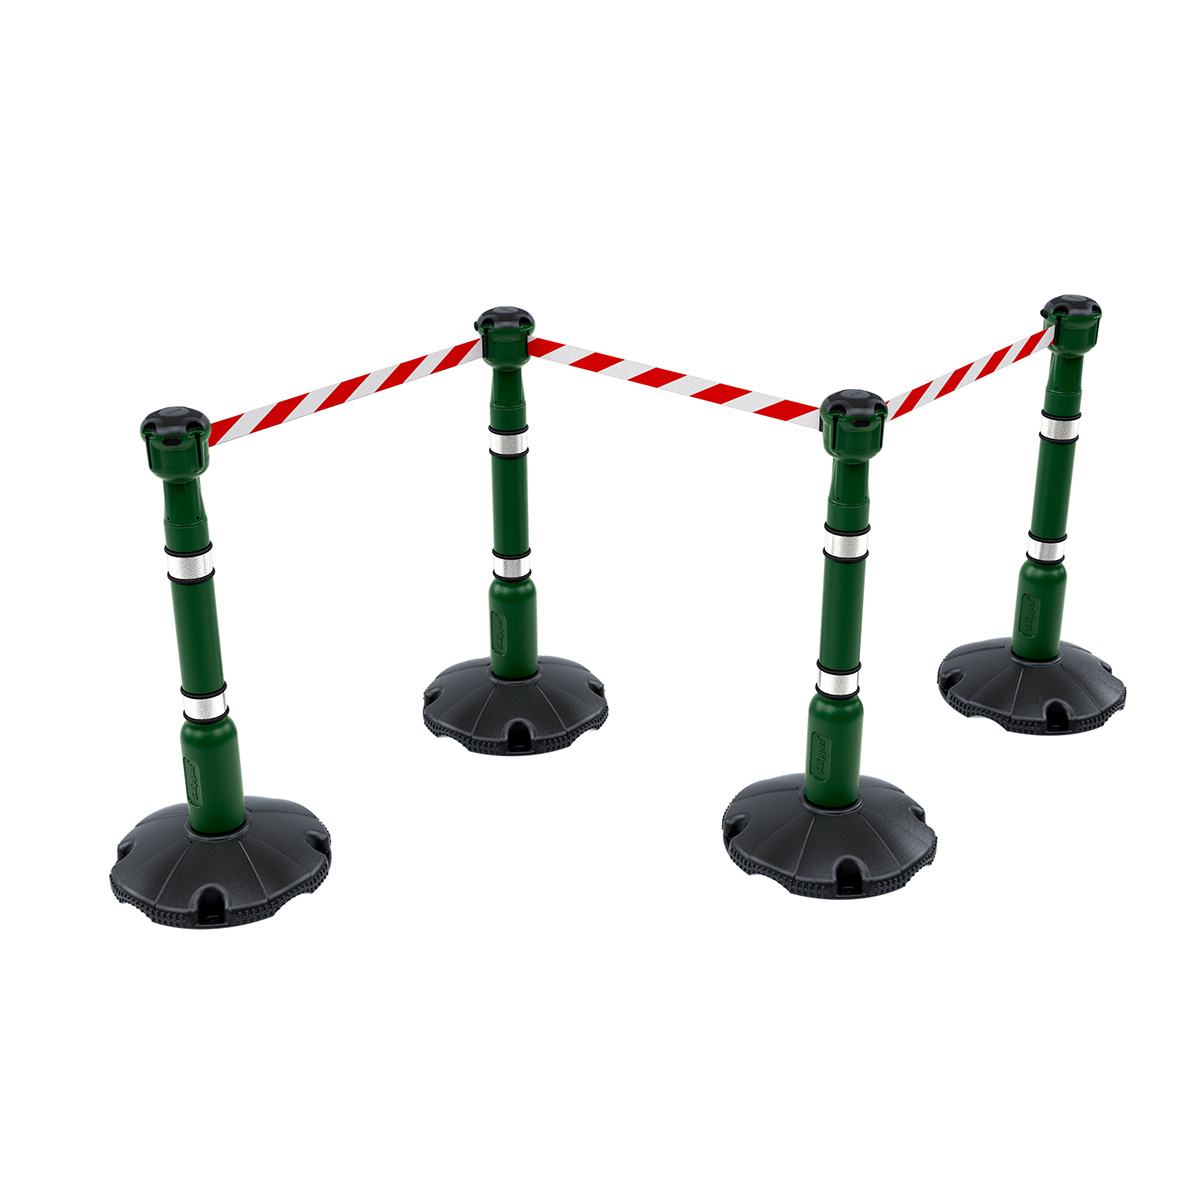 Skipper™ Portable Safety Barrier Kit 27m in Green With High Visibility Chevron Tape